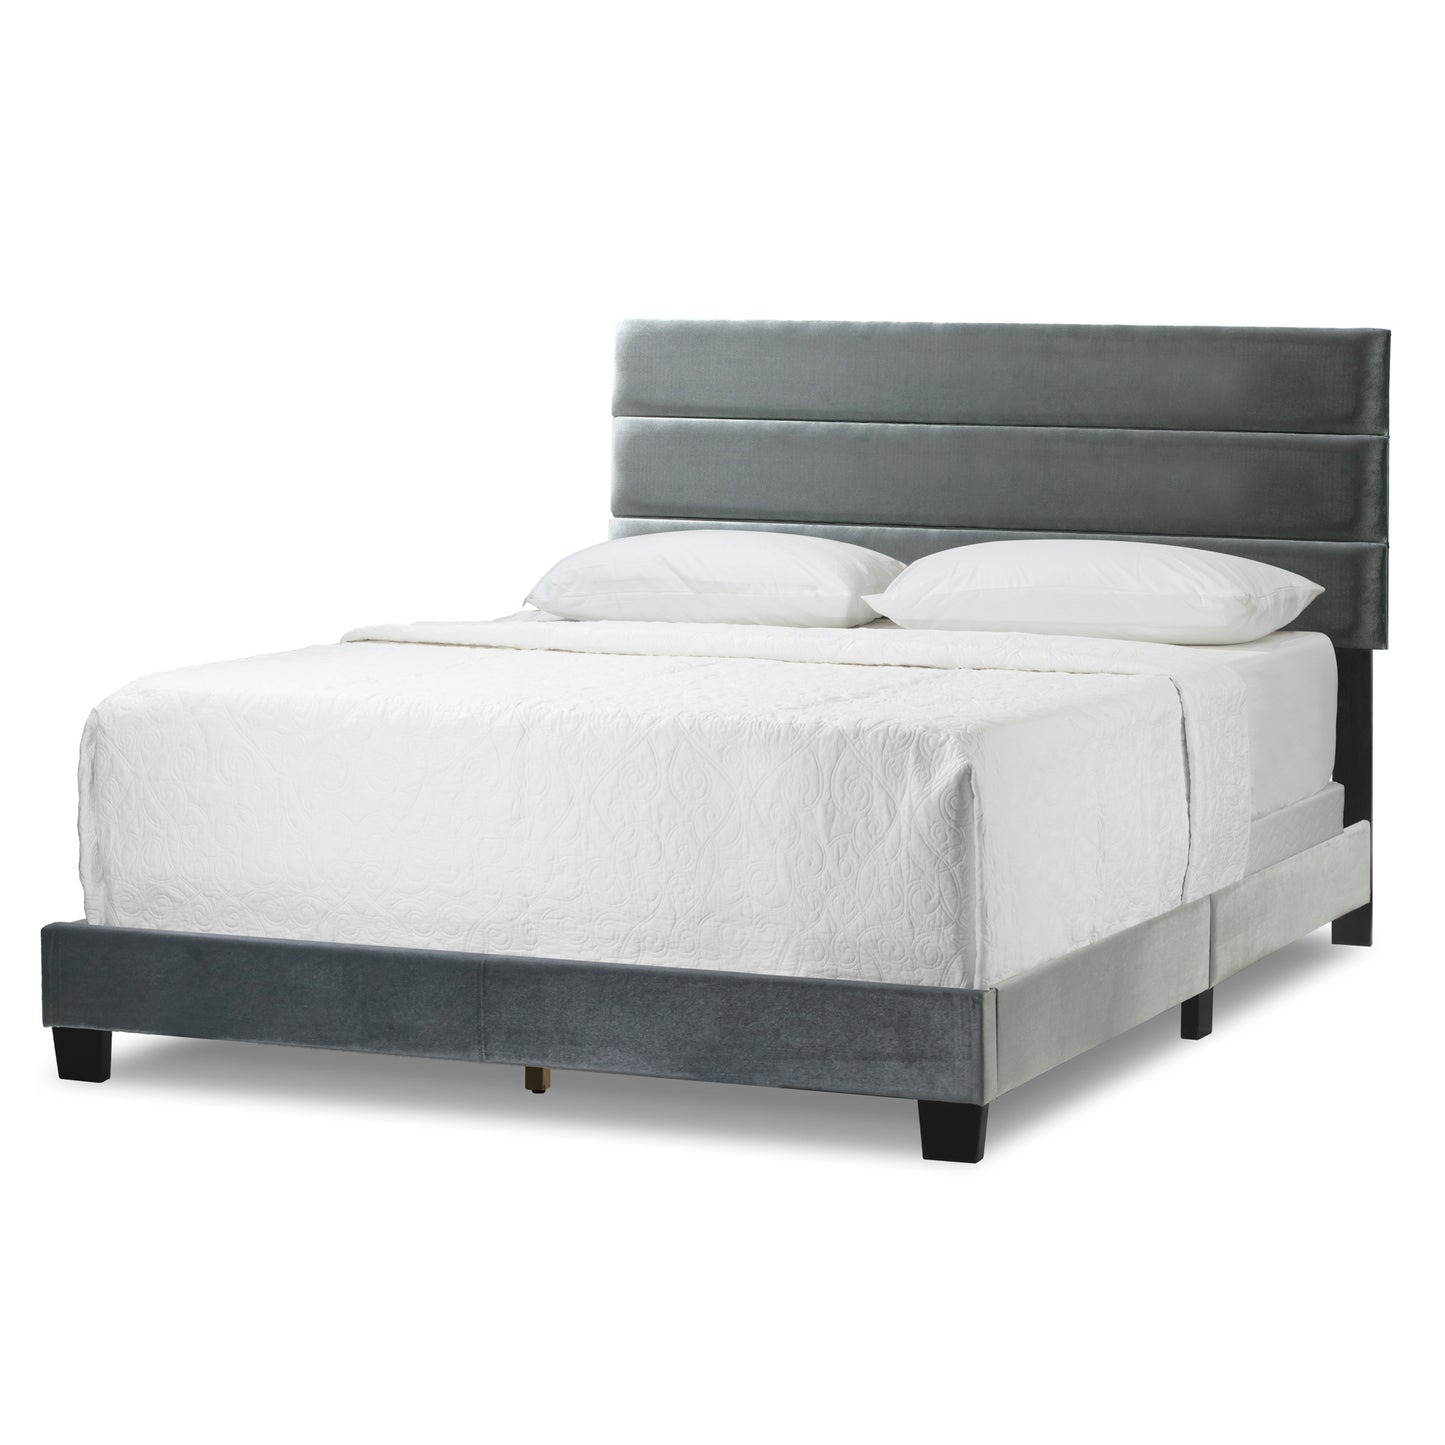 Aris Silver Grey Velvet Queen Bed with Line Stitching Tufting